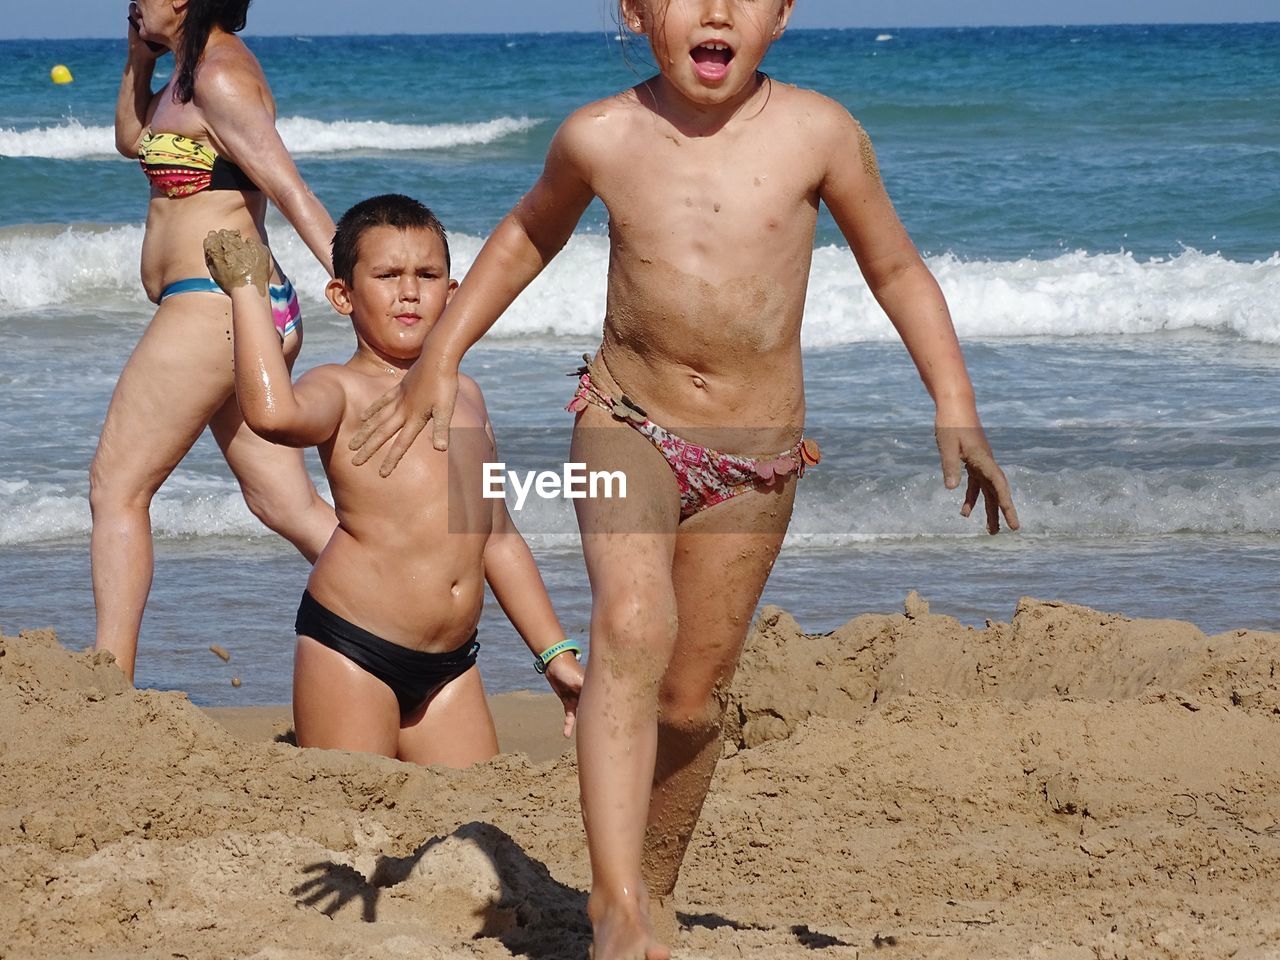 Shirtless siblings playing with sand at beach